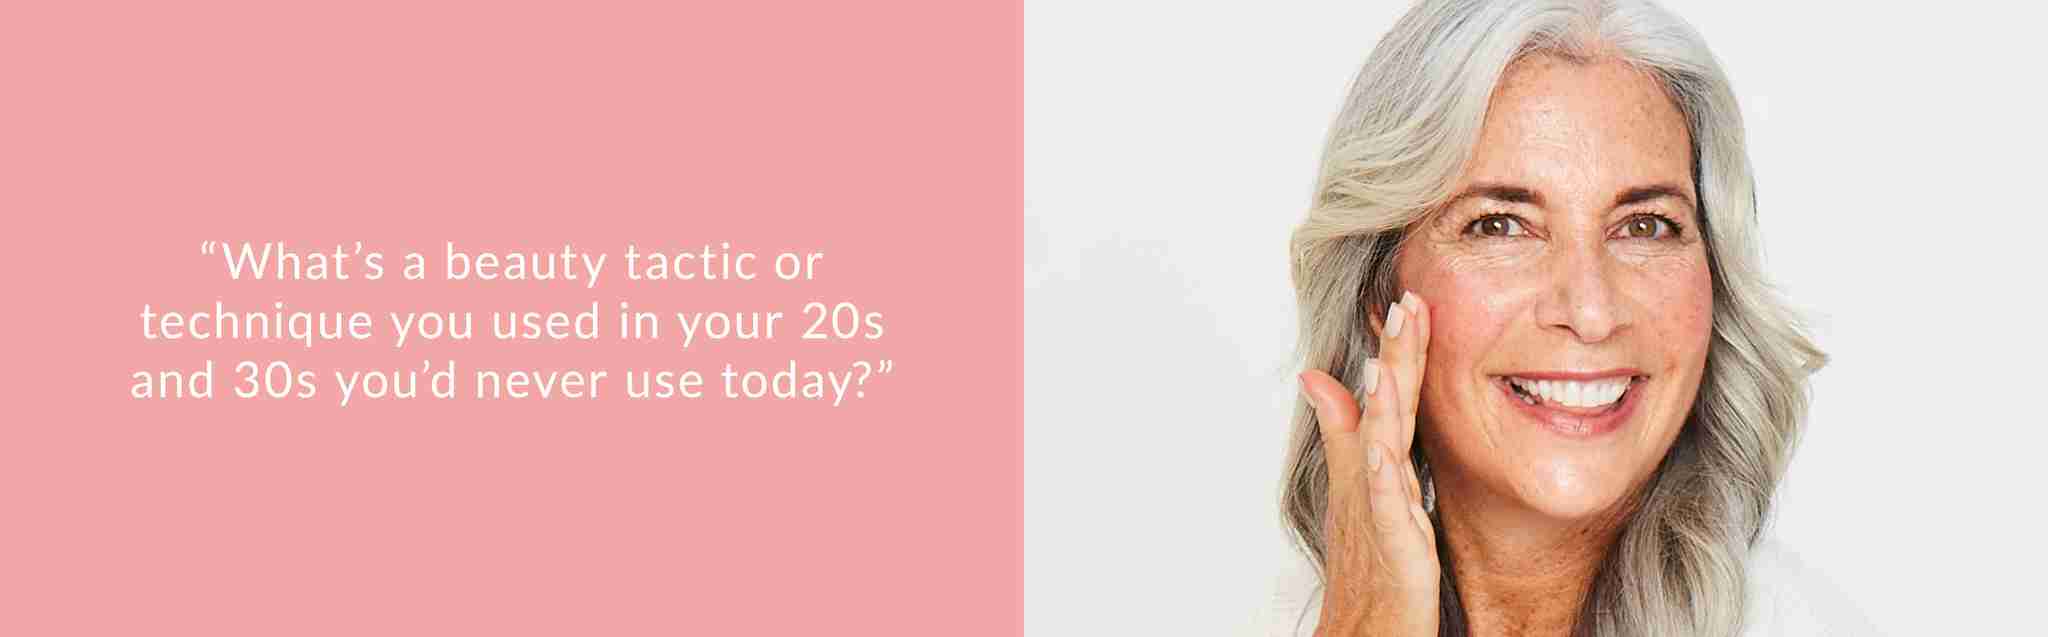 beauty tactics and techniques that were used in your 20s and 30s that you'd never use today